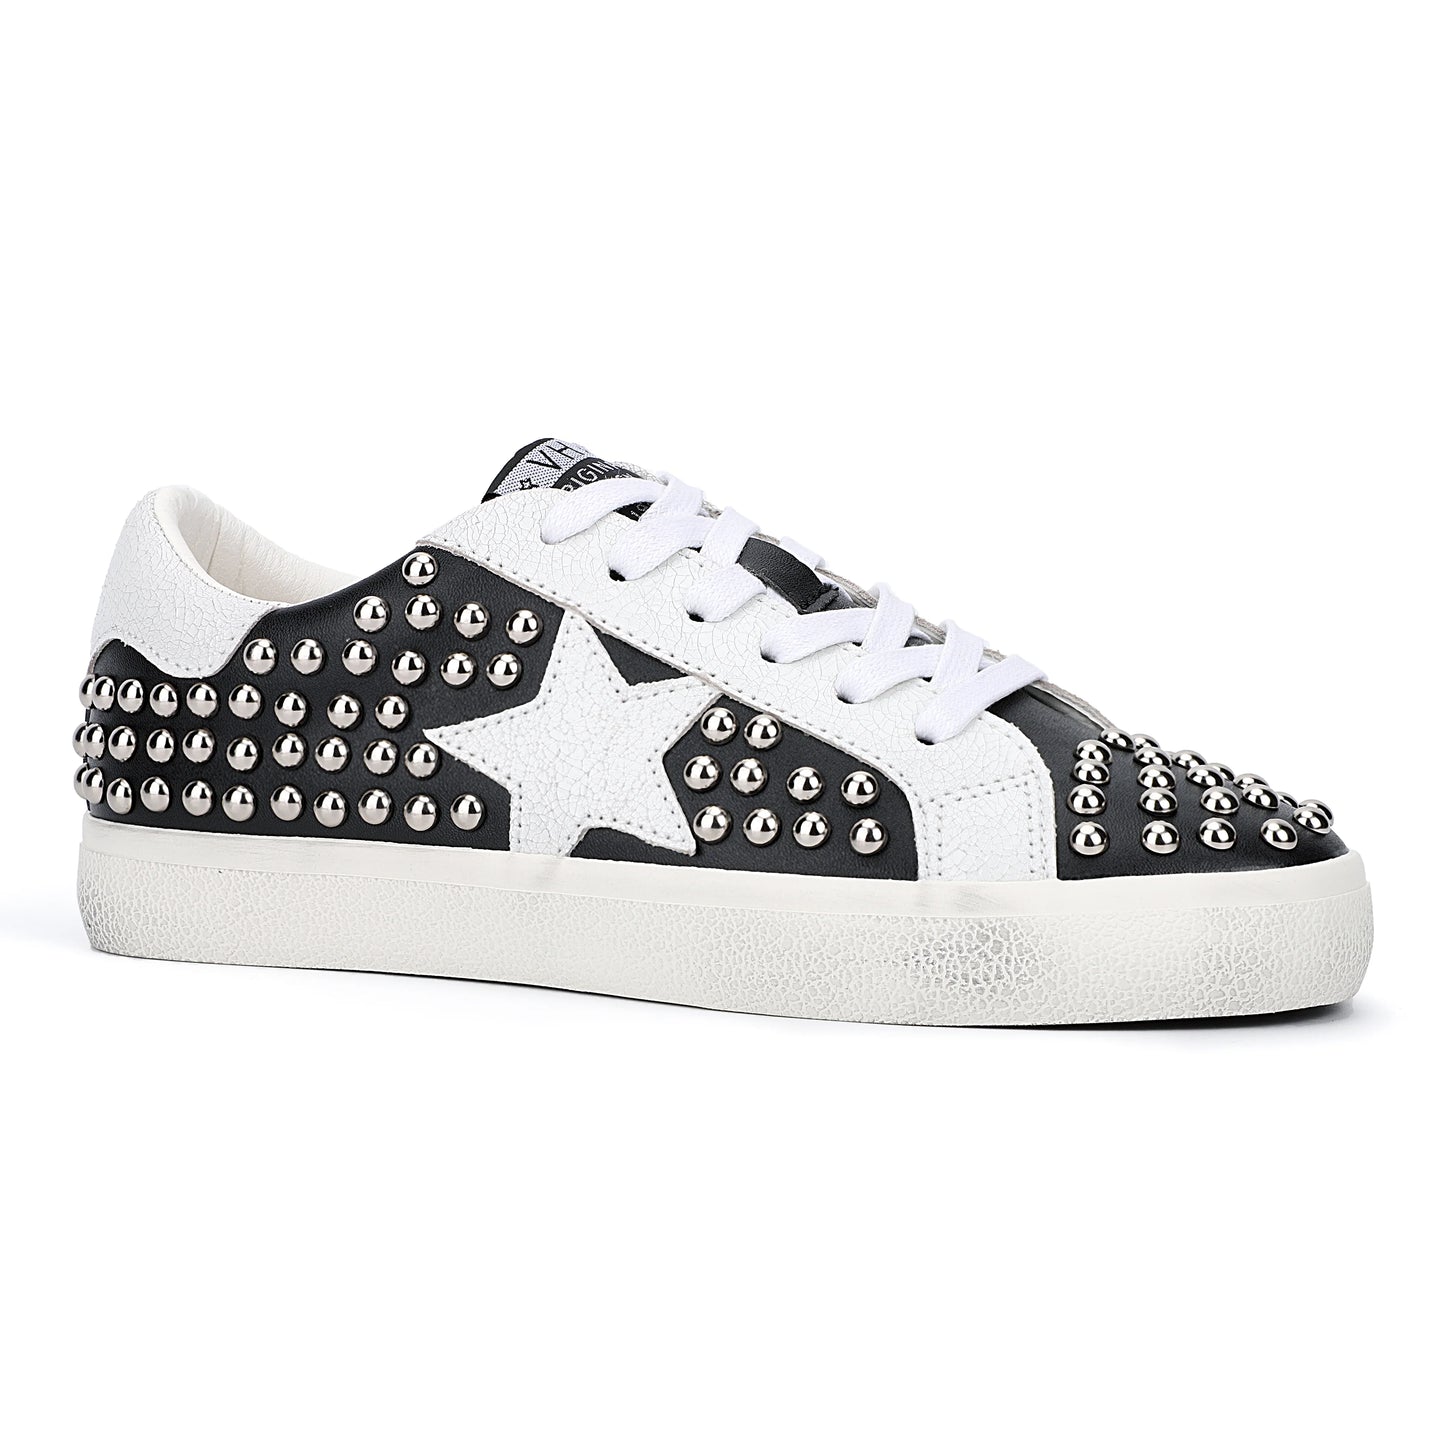 ANGIE BLACK SPIKED LOW TOP SNEAKERS